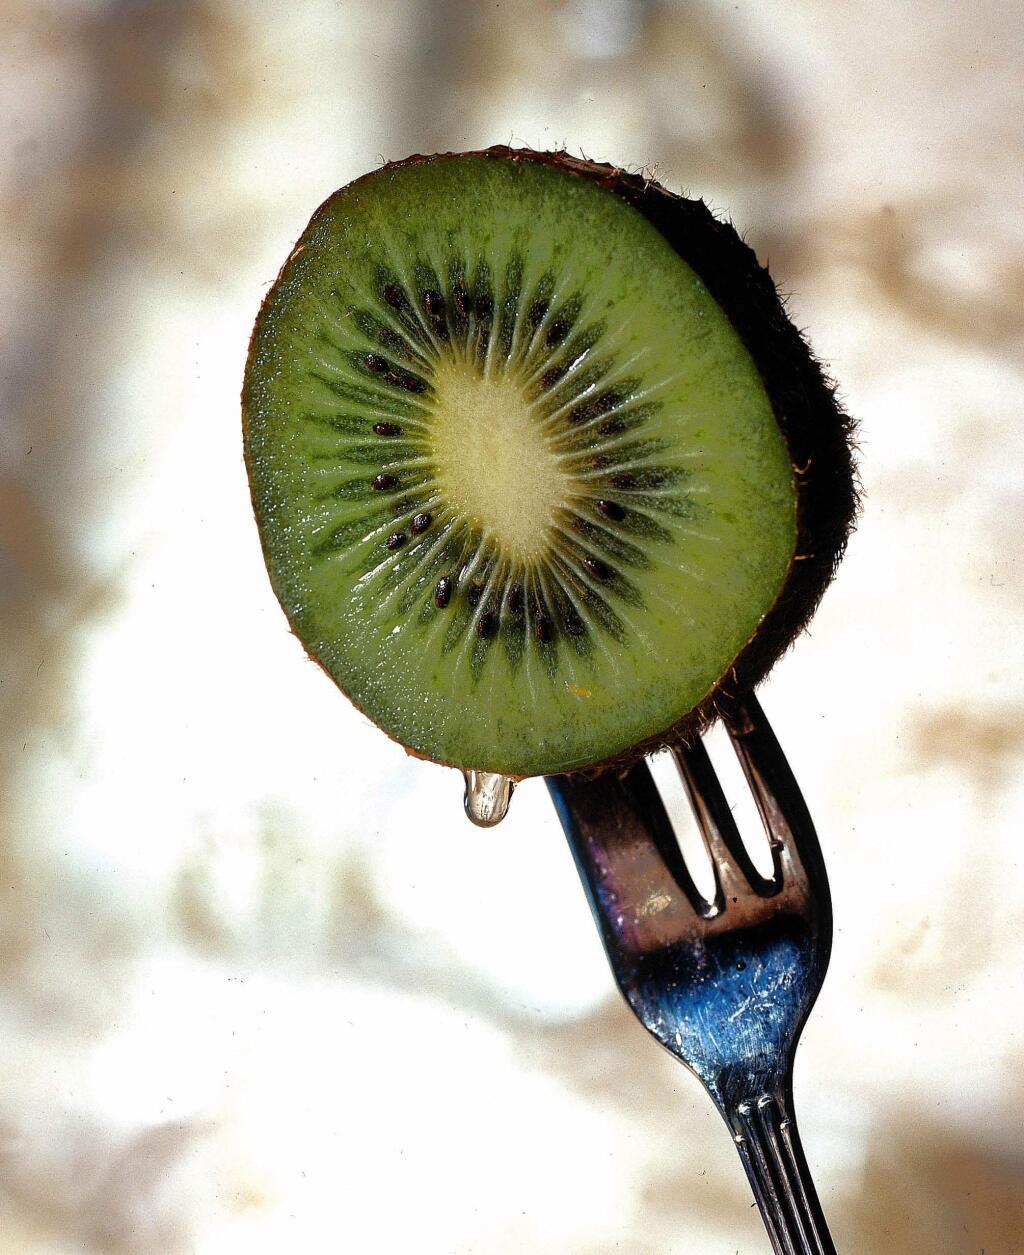 Eating better doesn't have to boring or painful. People can devise a more positive diet by adding foods rather than subtracting them. For instance add kiwi to breakfast. Kiwi has the most vitamin C of any fruit. (BOB FILA/CHICAGO TRIBUNE)